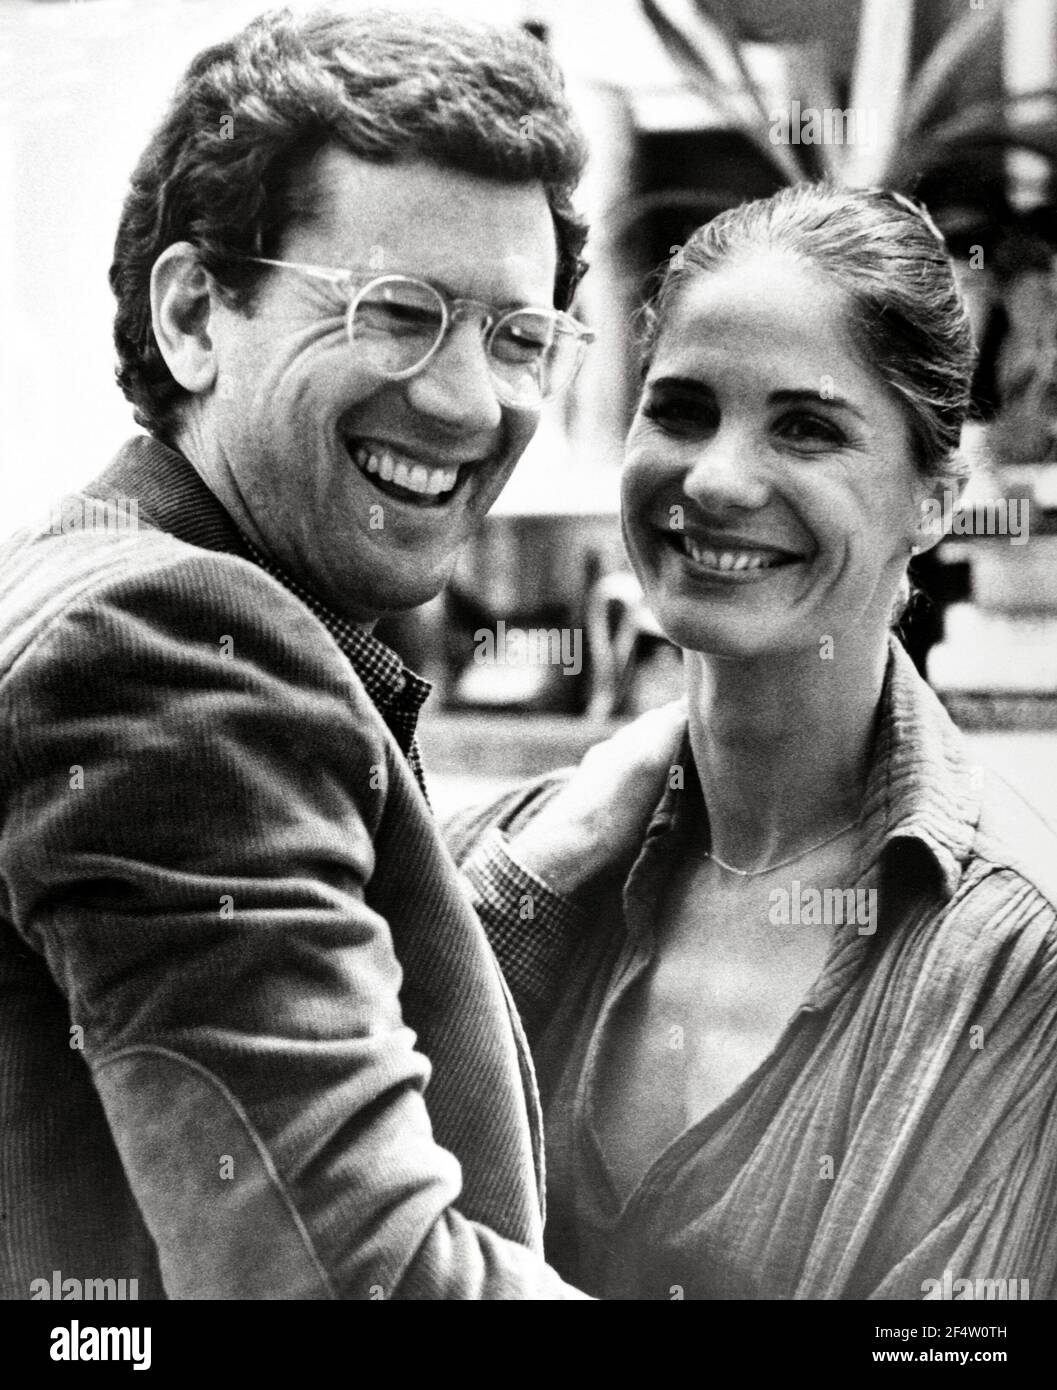 MICHAEL MURPHY and ANNE BYRNE in MANHATTAN (1979), directed by WOODY ALLEN. Credit: UNITED ARTISTS / Album Stock Photo